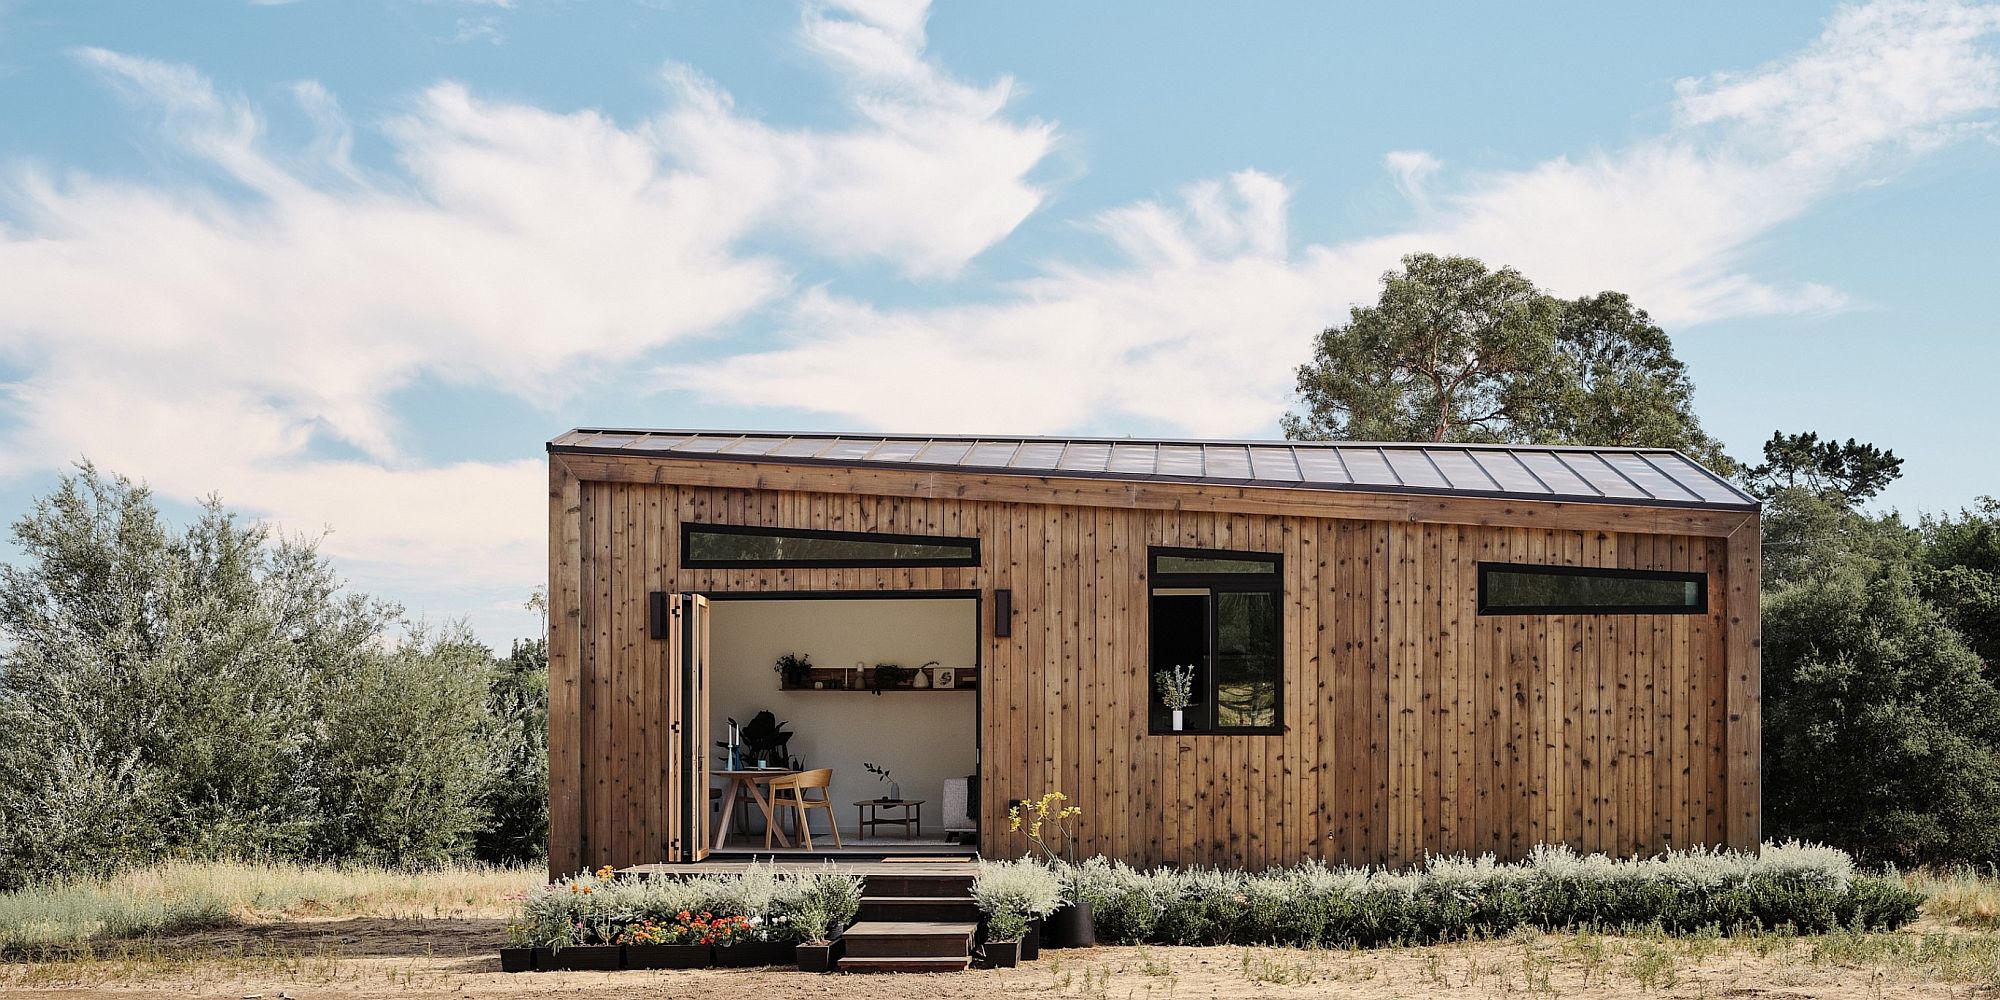 Backyard tiny house in wood offers smart living solutions in limited space